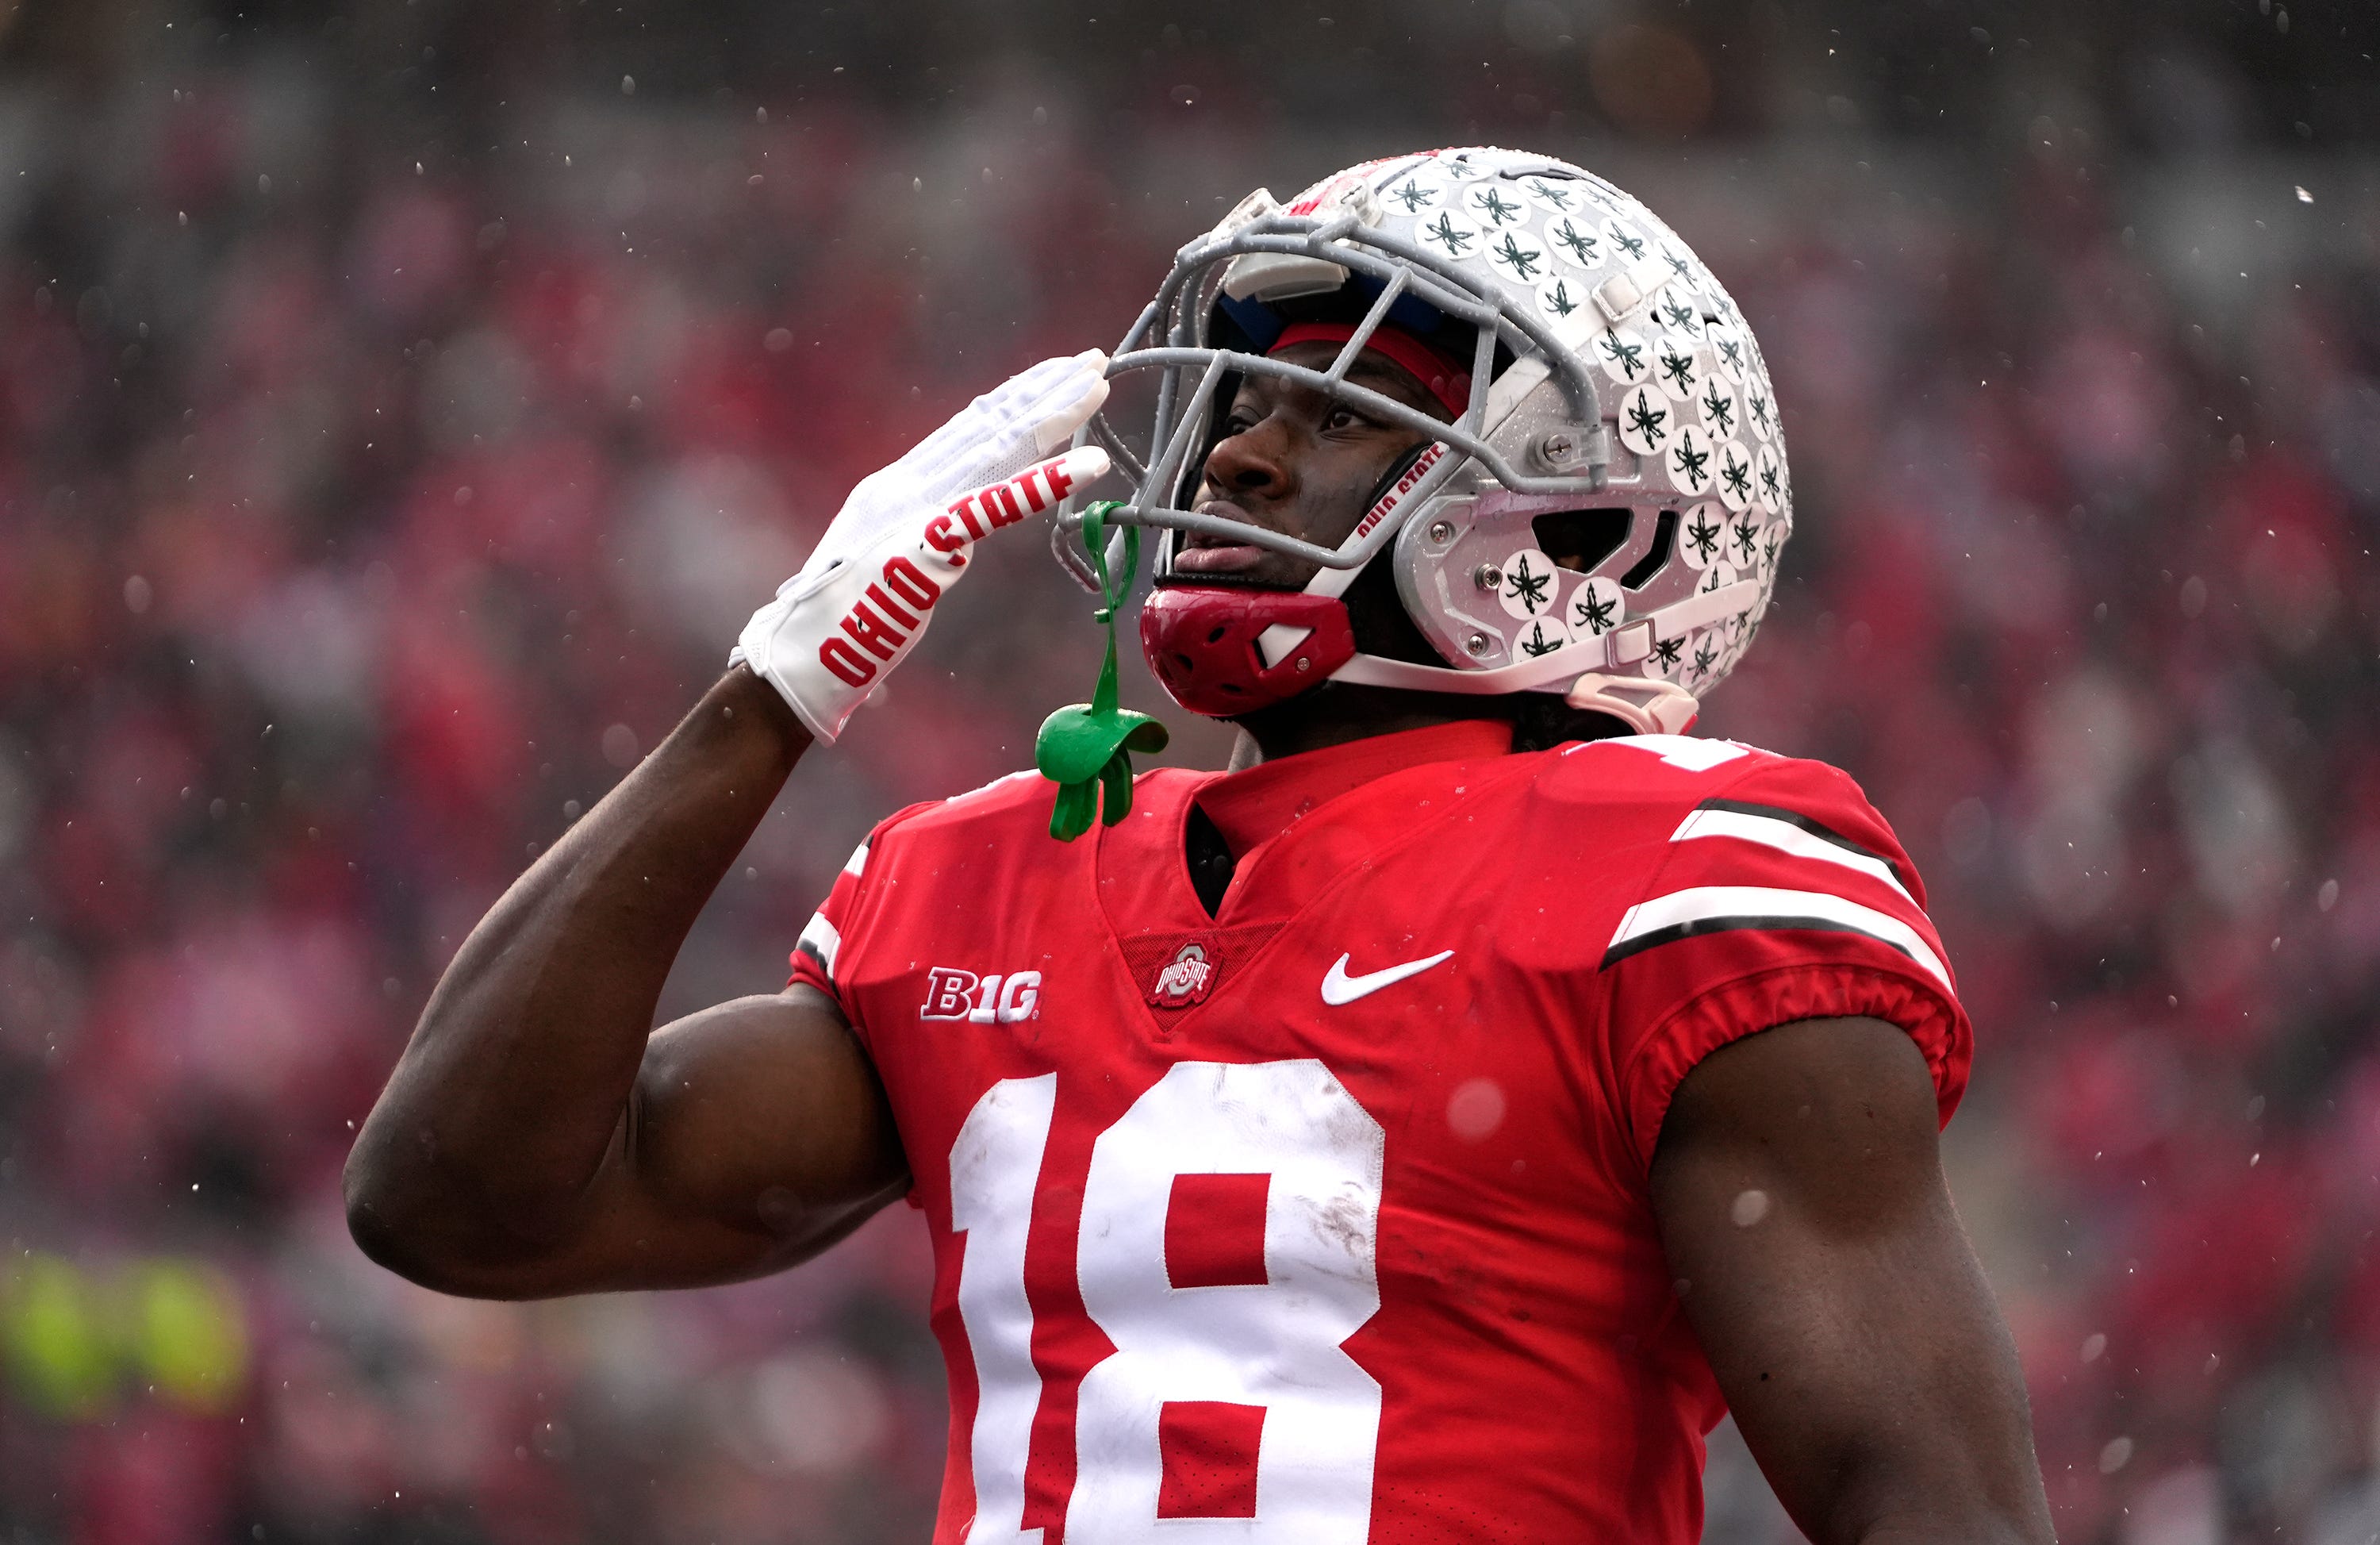 Ohio State Football: Marvin Harrison Jr. Expected to Make Draft History as Top-5 WR Prospect